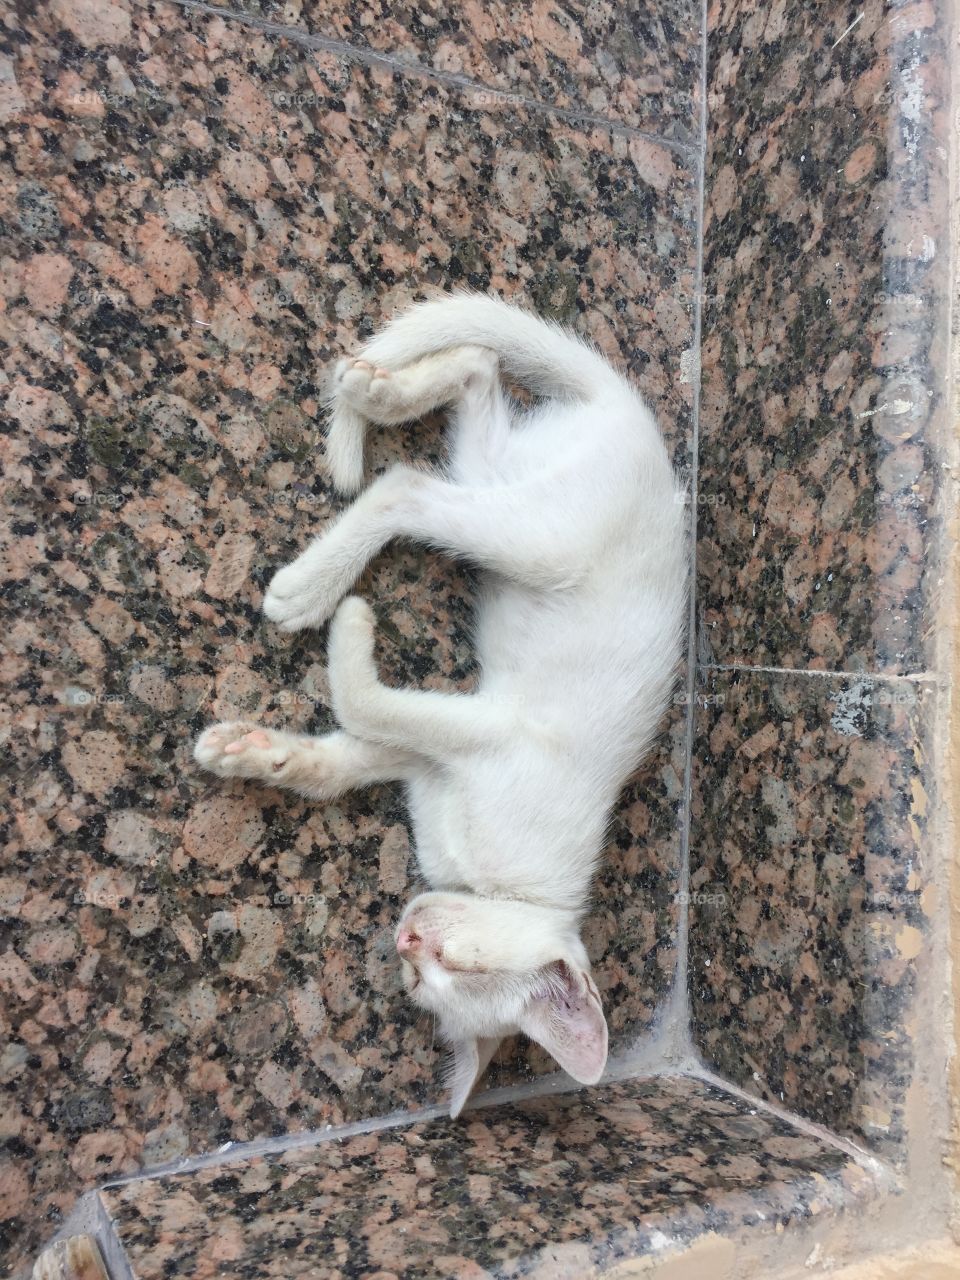 Sleeping hungry cat at entrance of my office. 